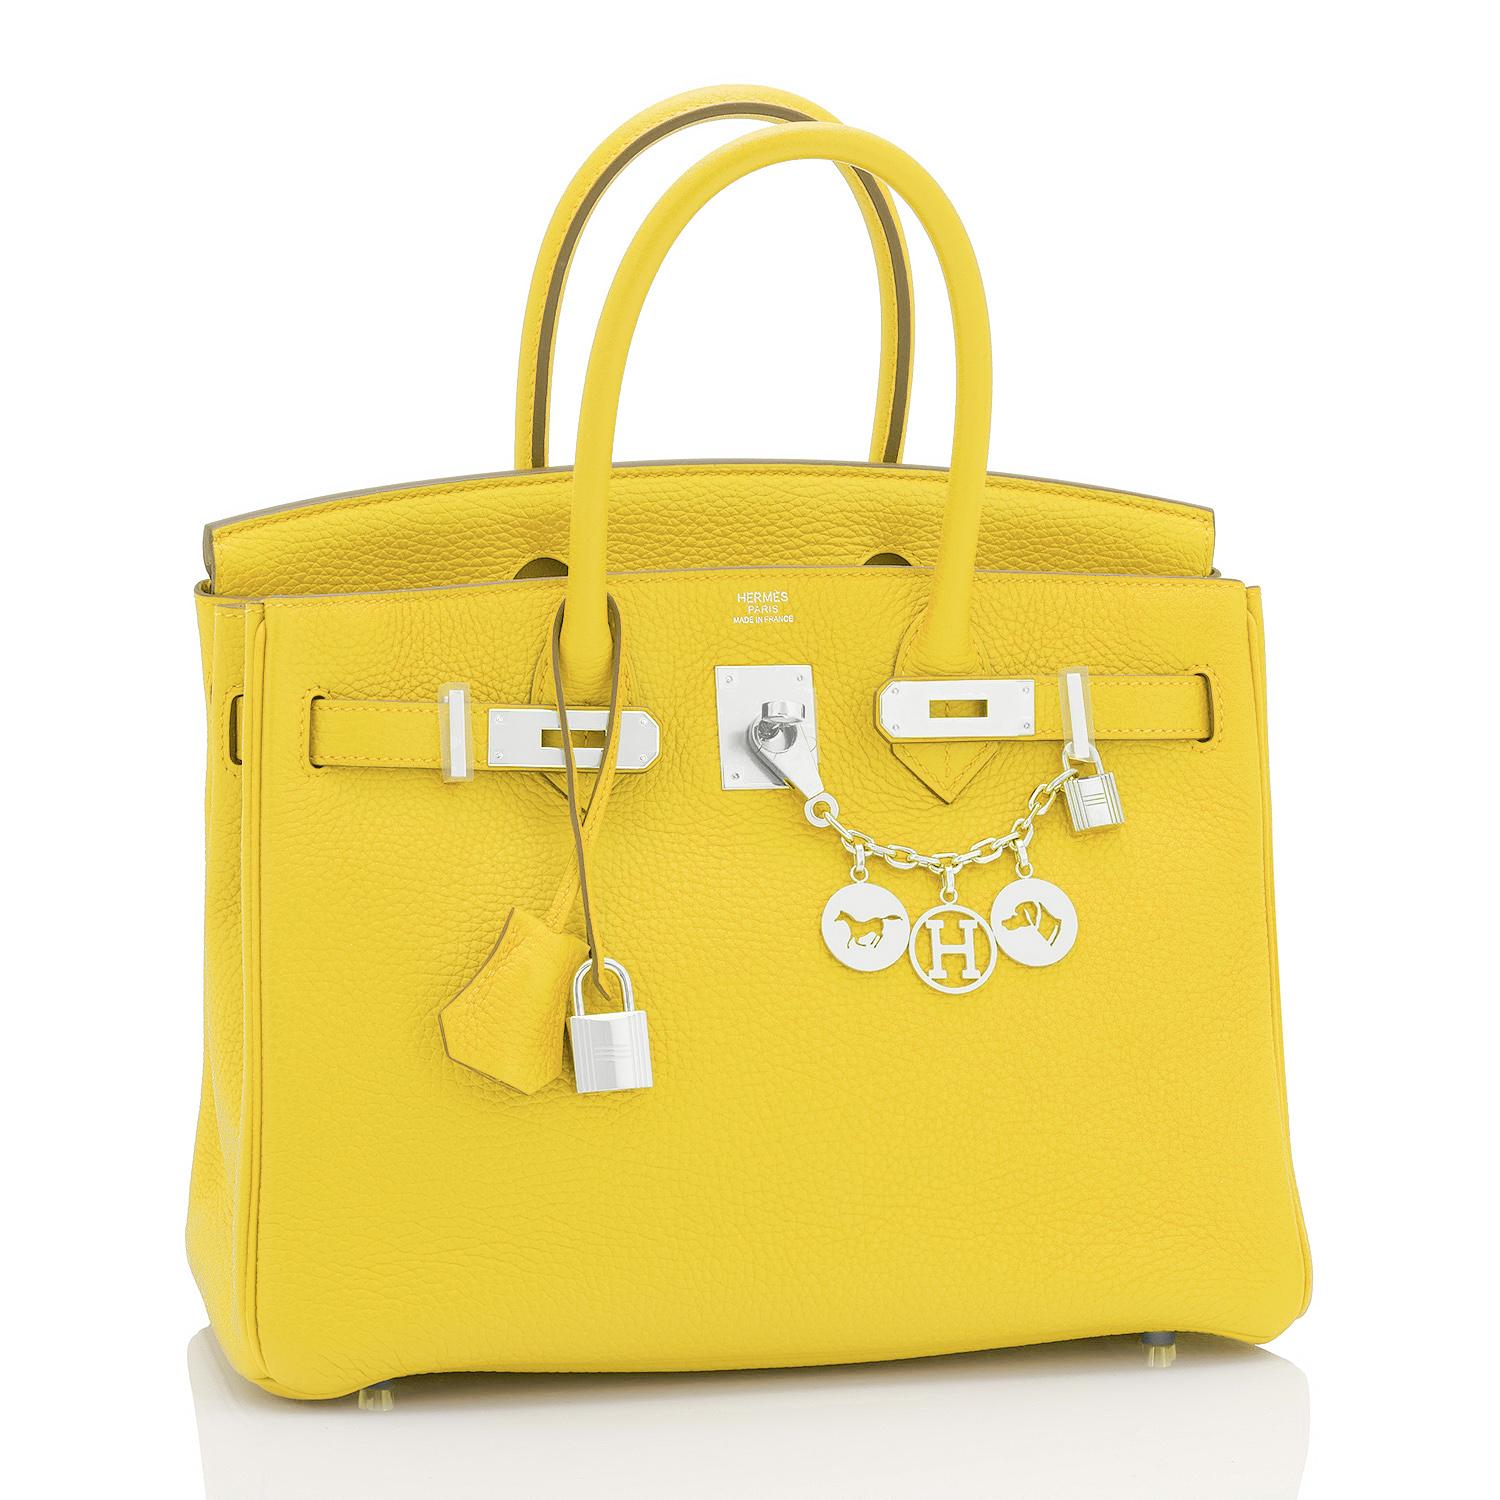 Hermes Birkin 30 Lime Fluo Yellow Bag RARE U Stamp, 2022 
Just purchased from Hermes store; bag bears new interior 2022 U Stamp.
Brand New in Box. Store Fresh. Pristine condition (with plastic on hardware). 
Perfect gift! Coming full set with keys,